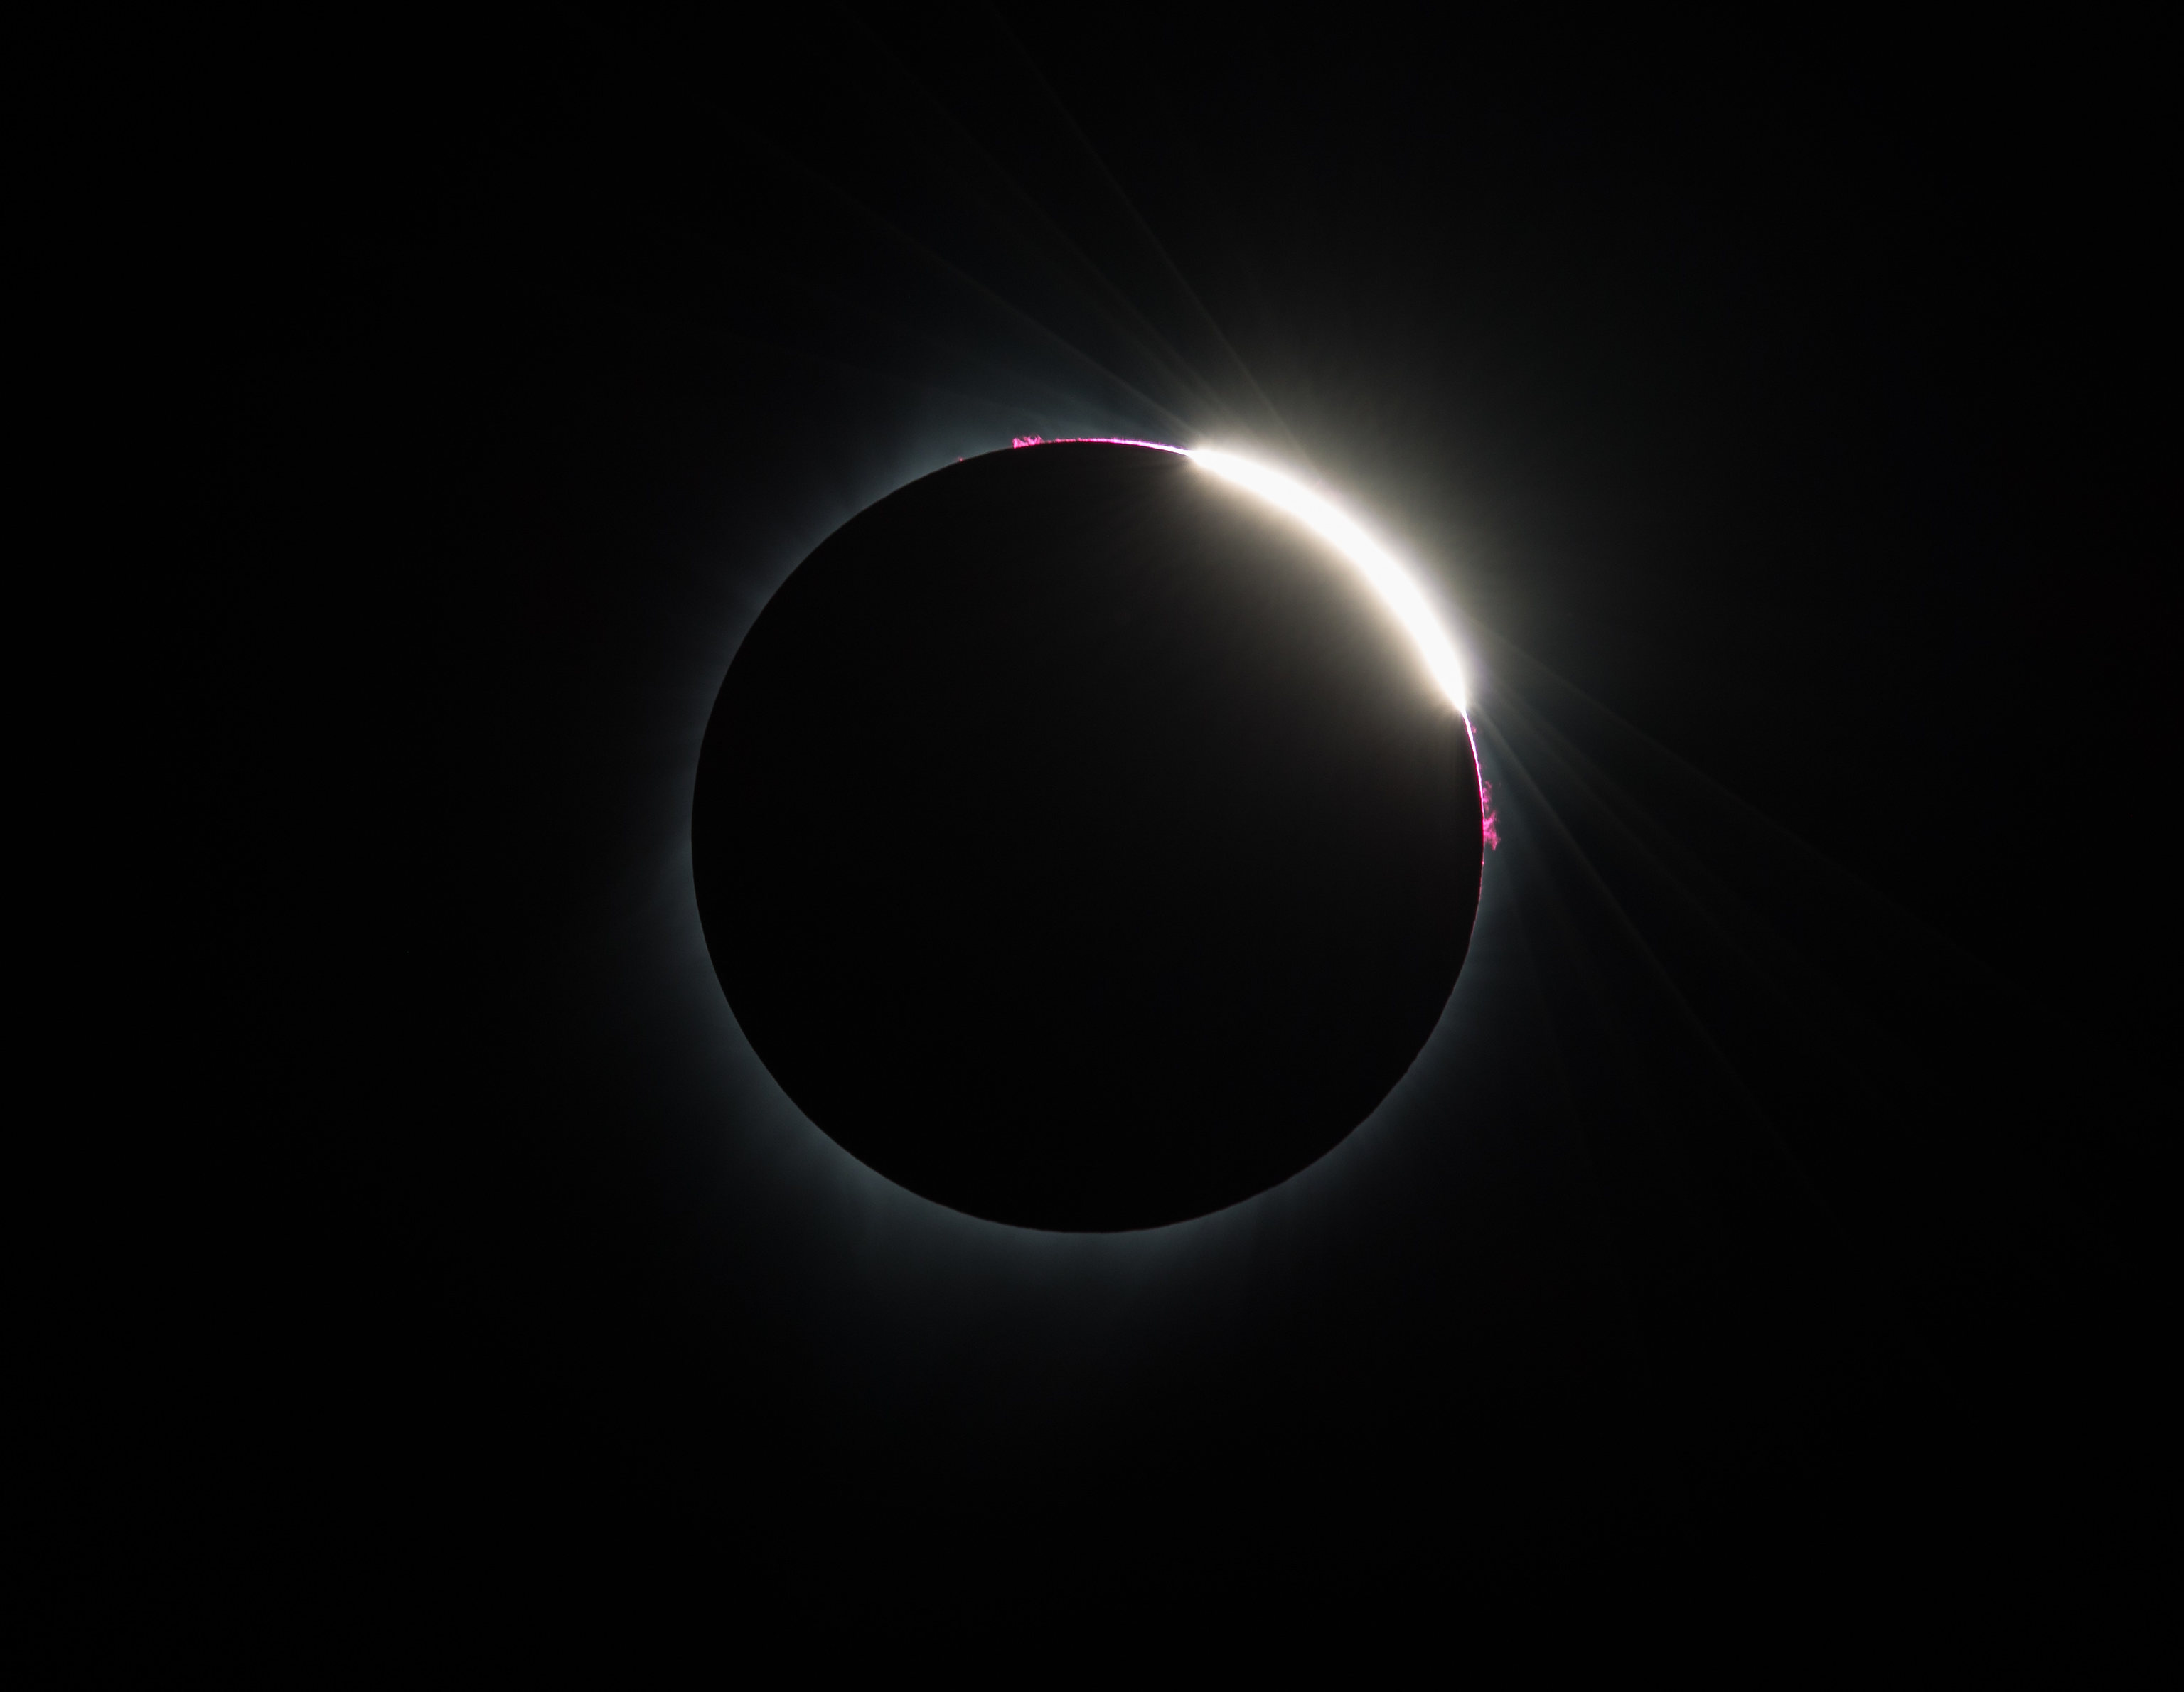 Against a black background is a solar eclipse. There is a large black circle in the middle of the image – the Sun. On the top right of the circle is a bright white sliver of light from the Sun. On either side of the sliver of light are small spots of pink looping away from the circle – prominences.